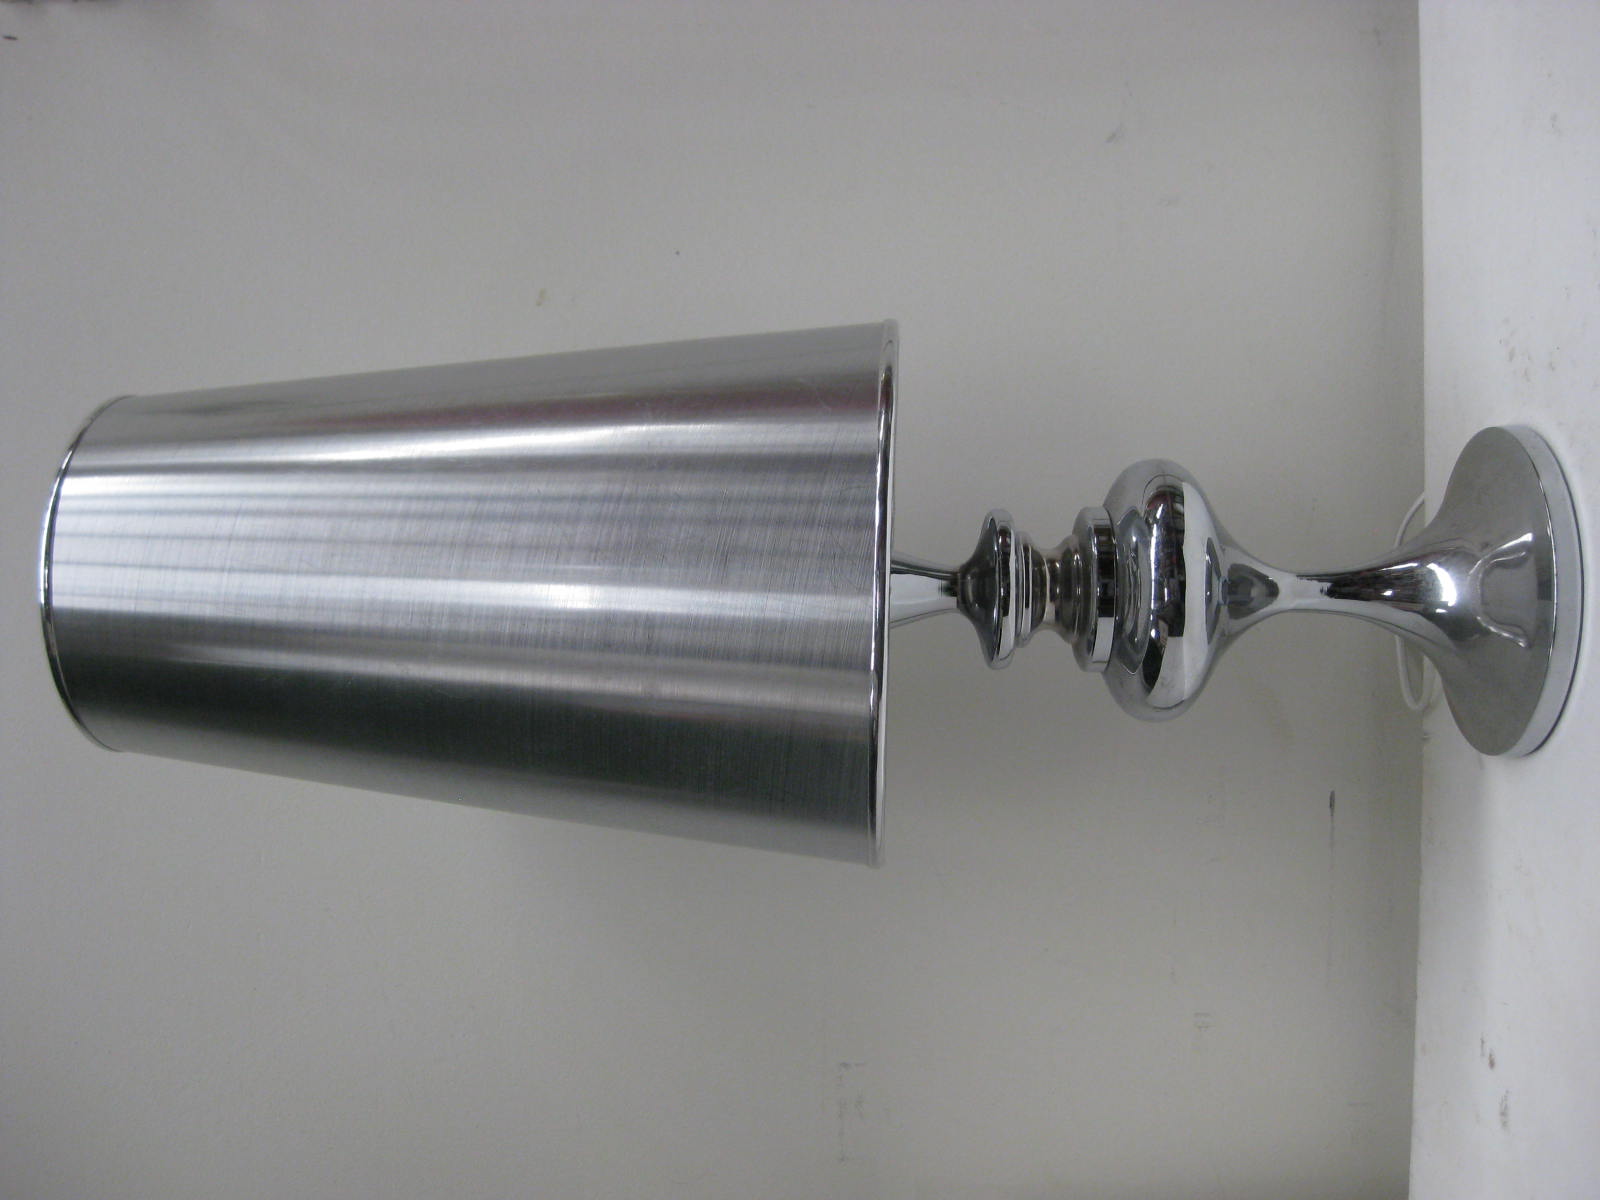 LAMP, Table Lamp (Contemp) - Brushed Silver